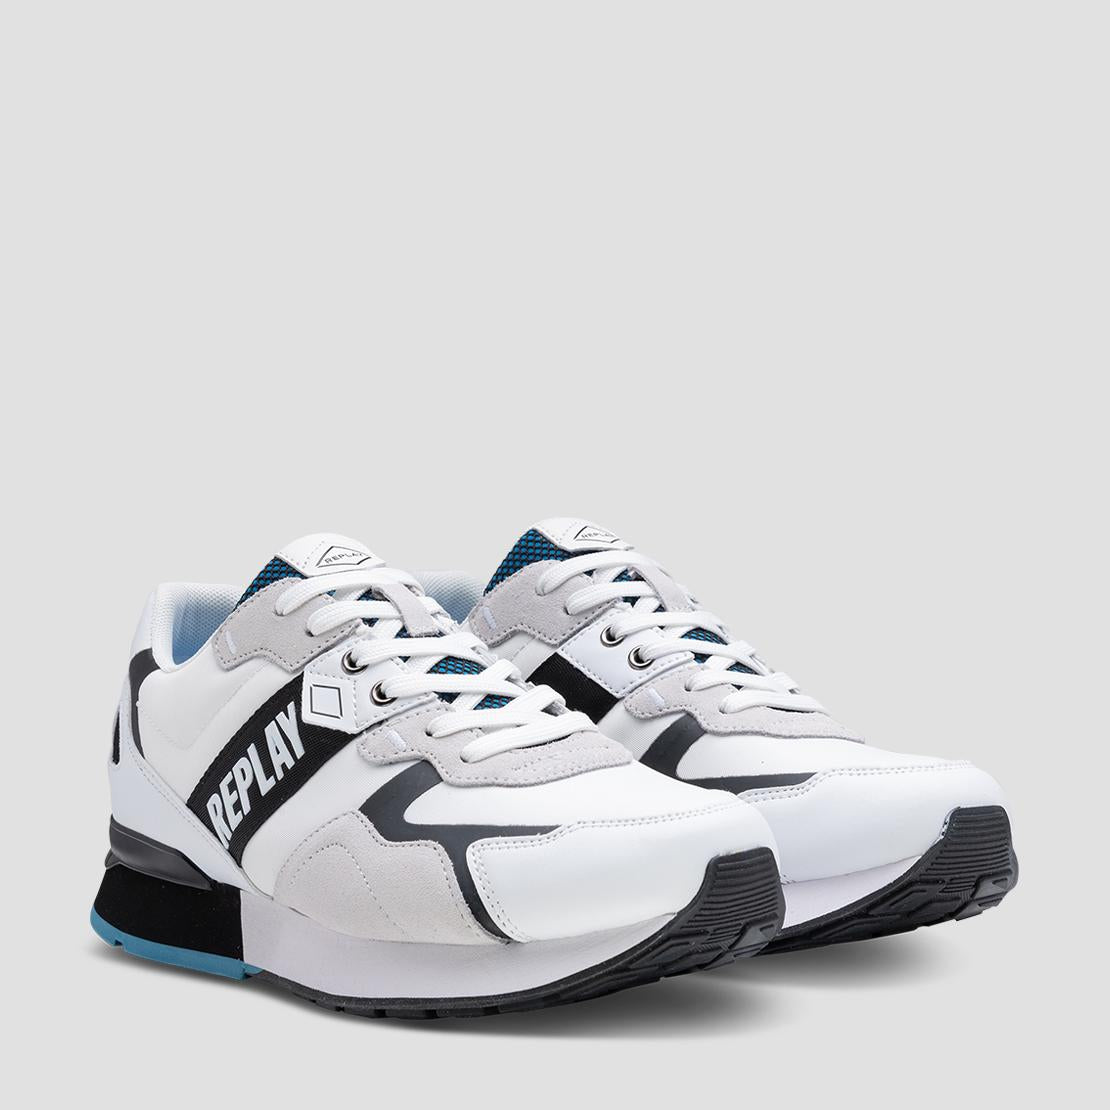 REPLAY "Adrien Game 3" RS1D0048T White/Blue